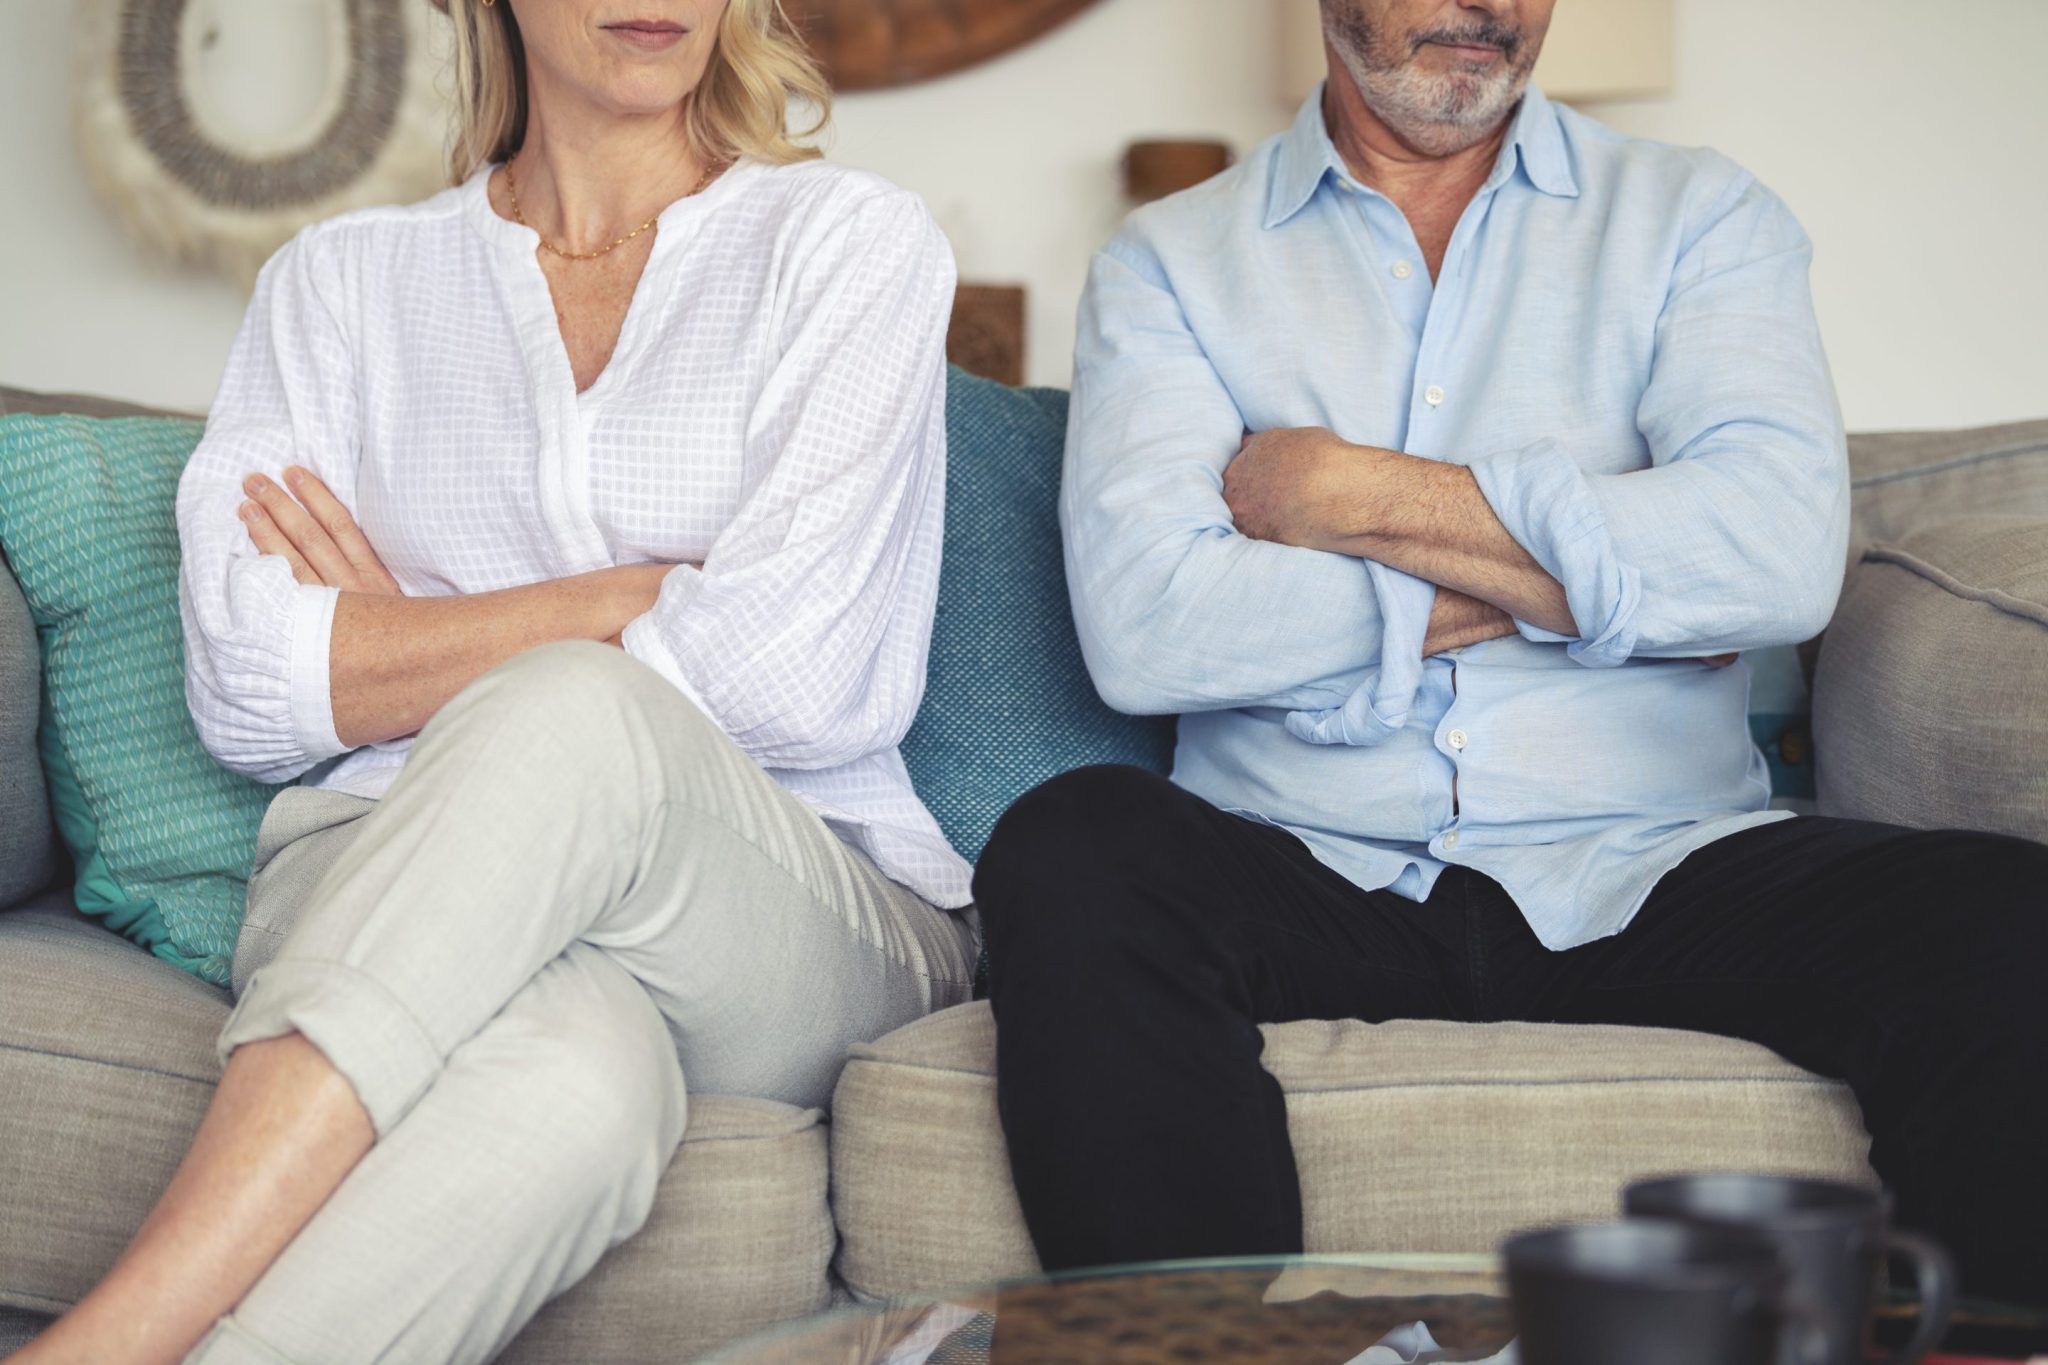 ‘gray’ divorce is sky-rocketing among baby boomers. it can wreak havoc on their retirements